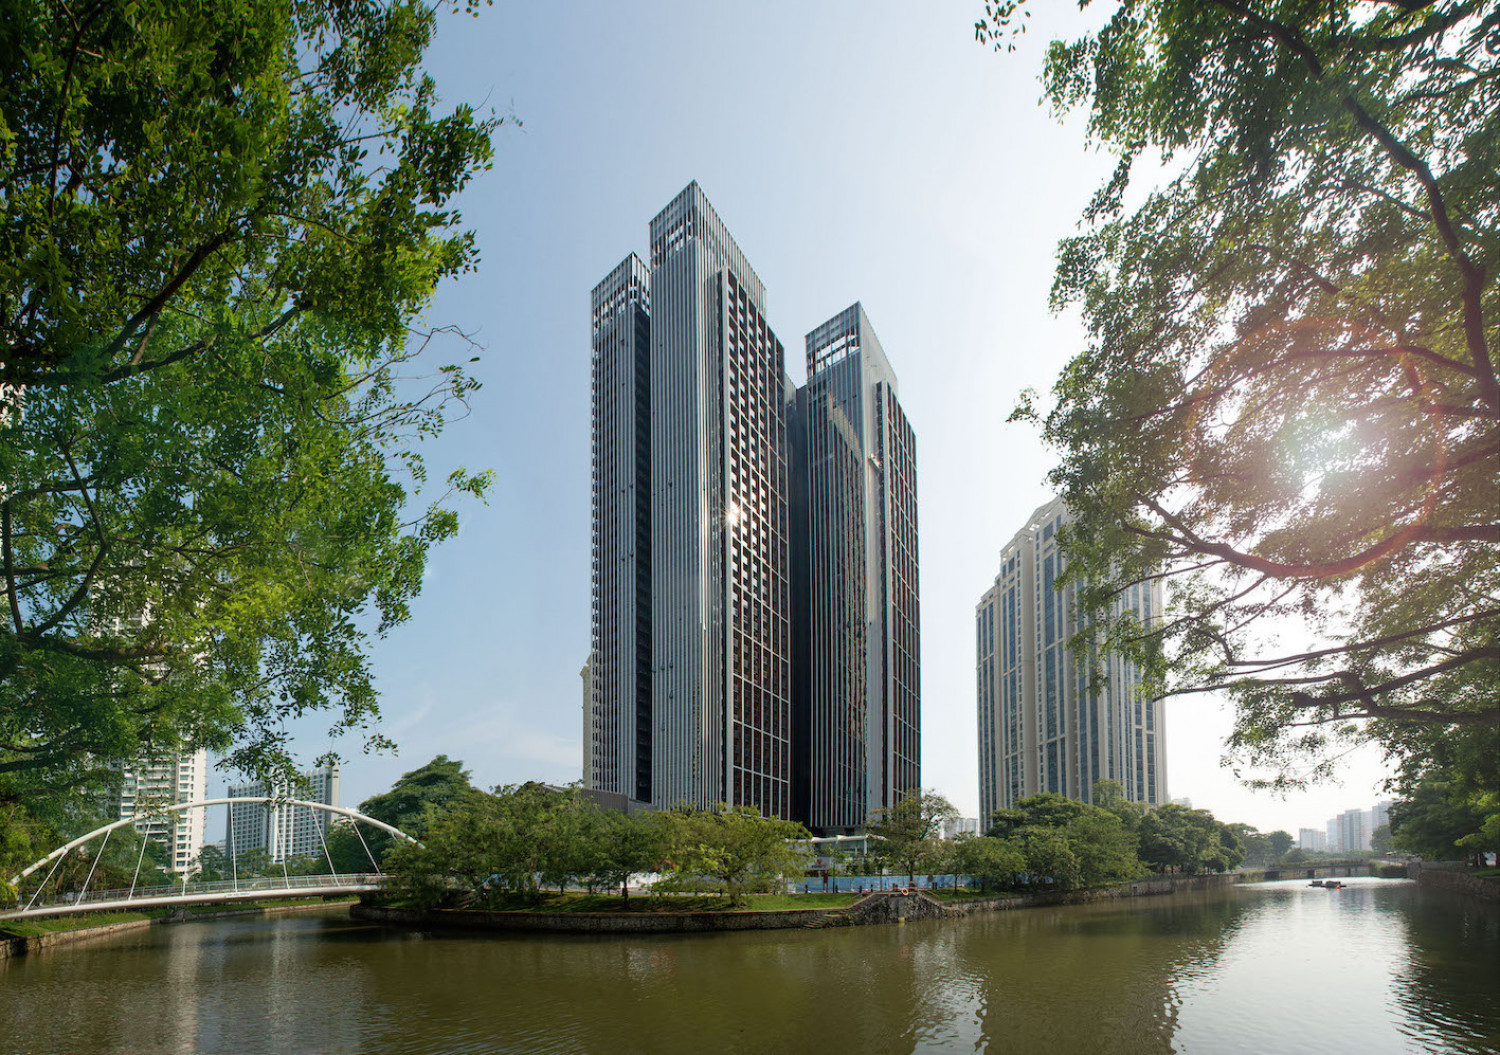 Riviere at Jiak Kim Street is 100% sold, says Frasers Property - Property News